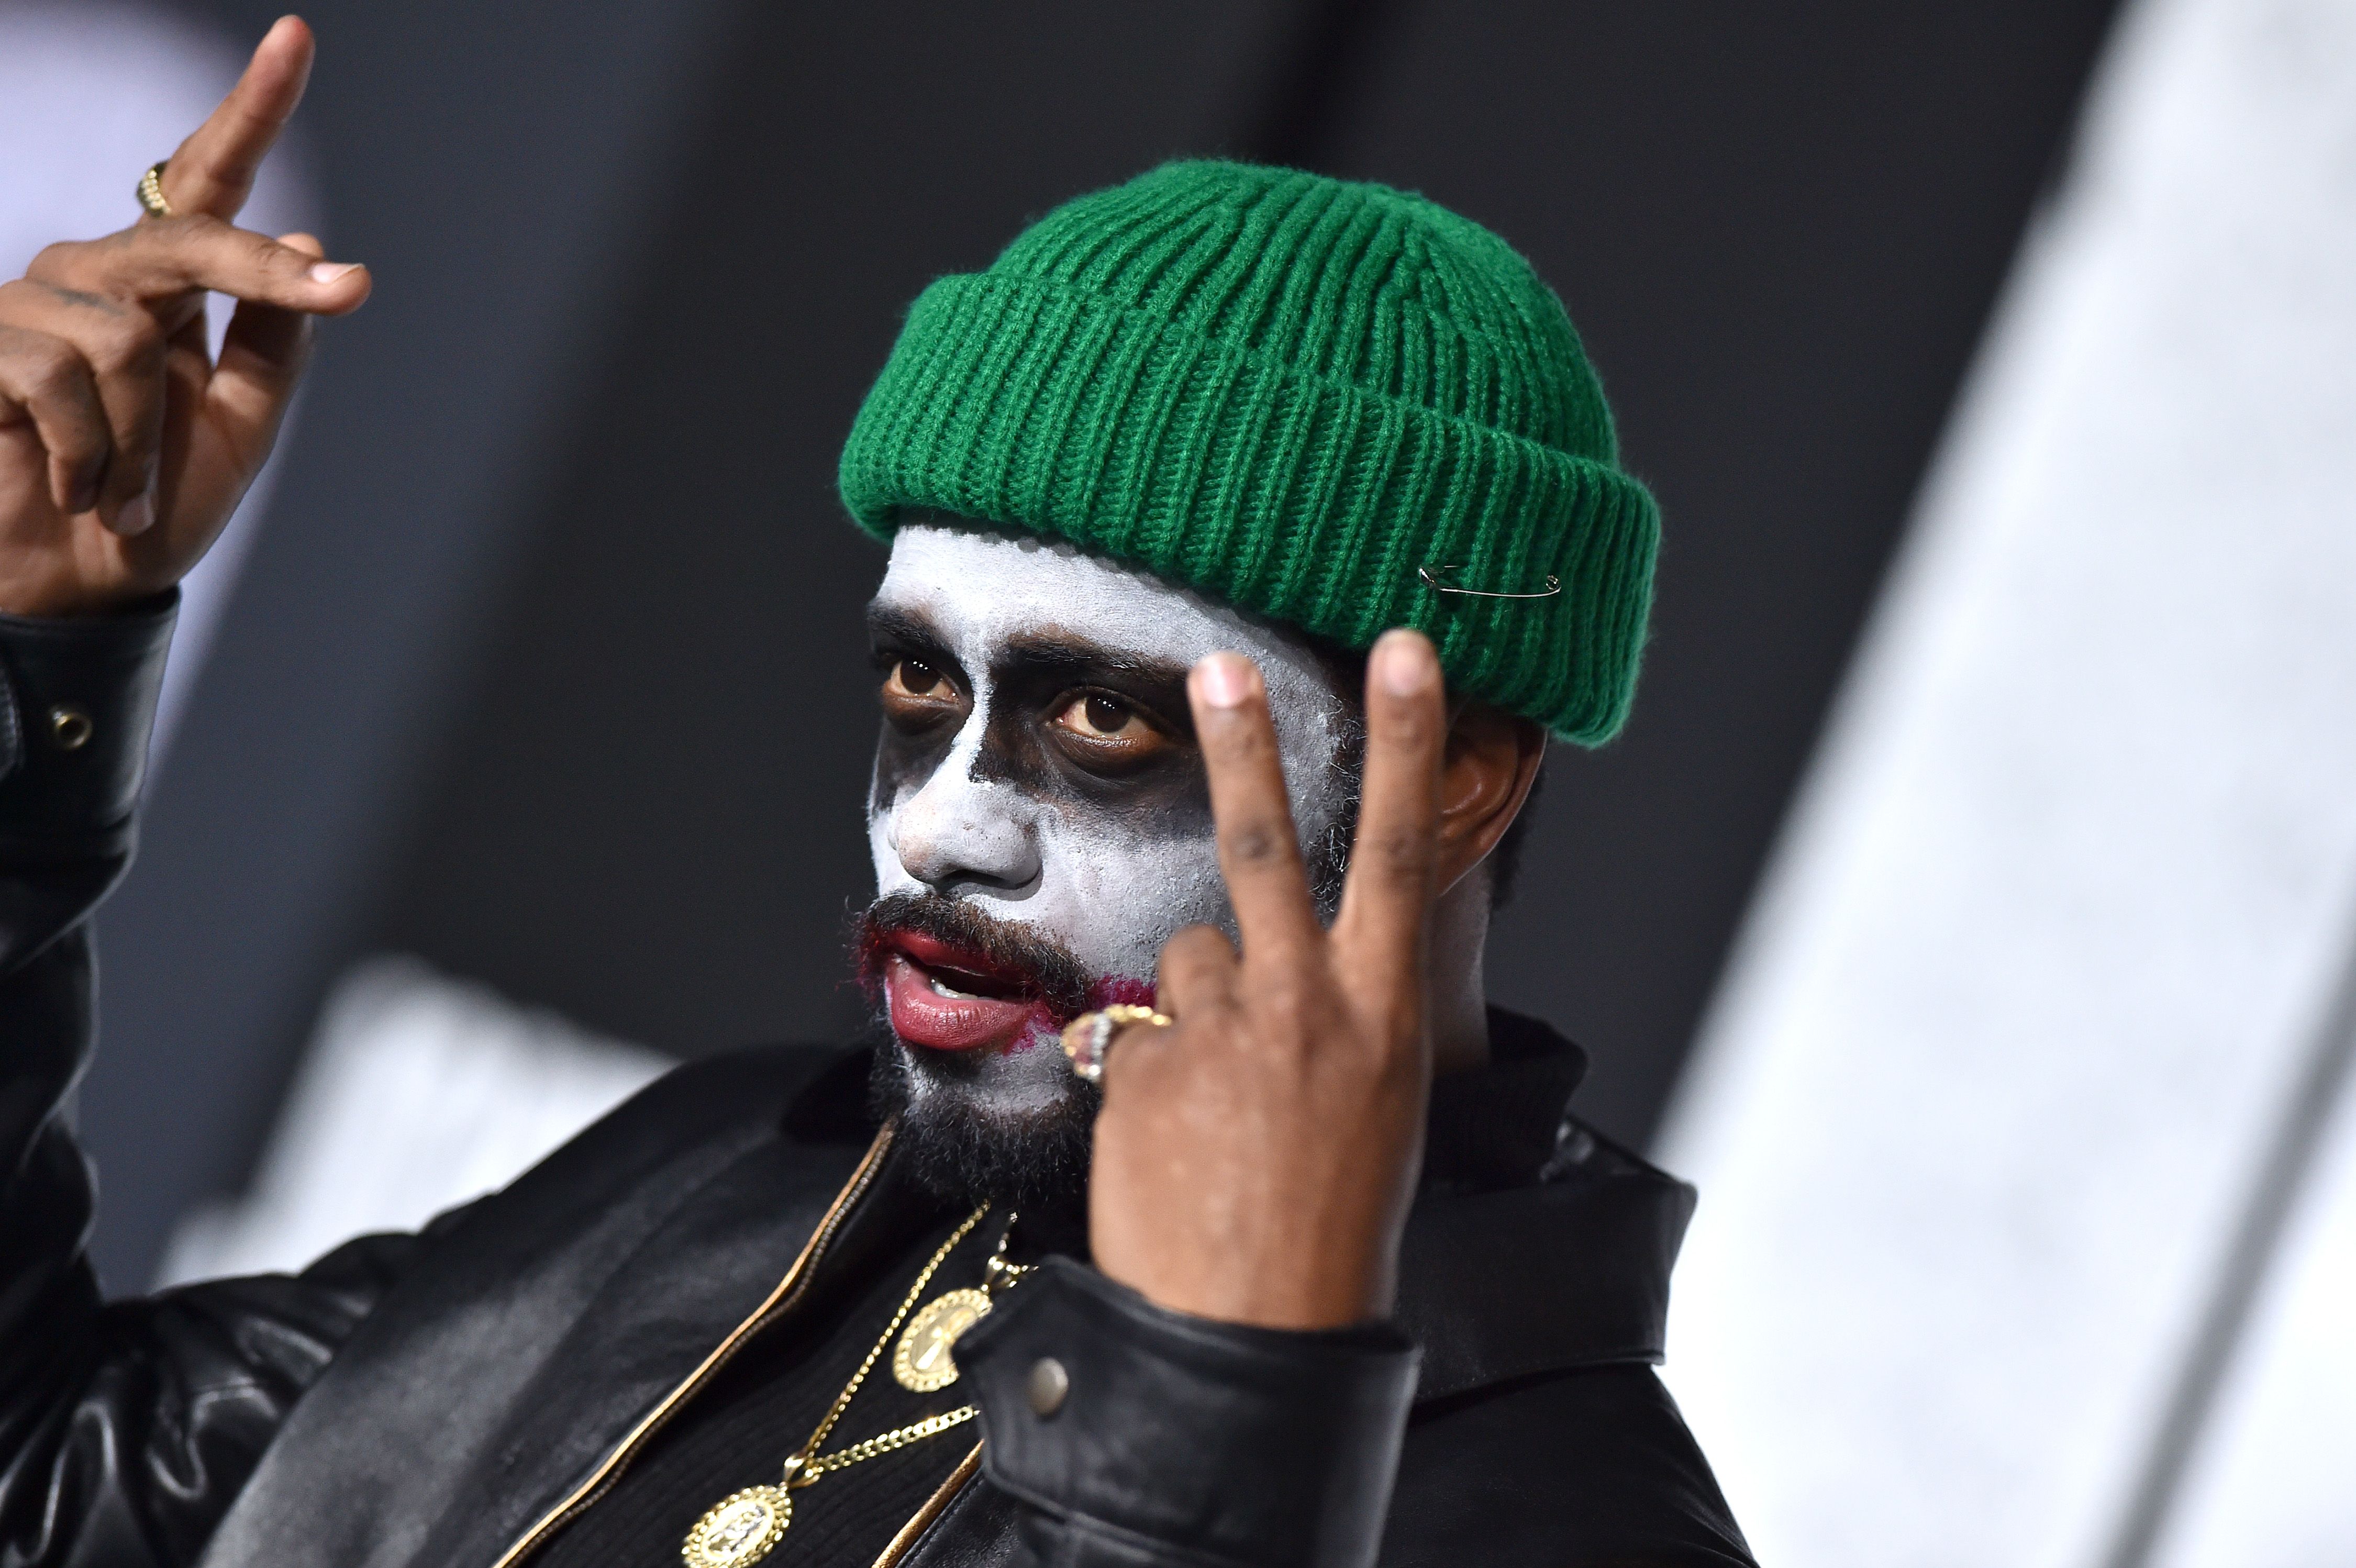 LaKeith Stanfield Went In At The 'Joker' Premiere